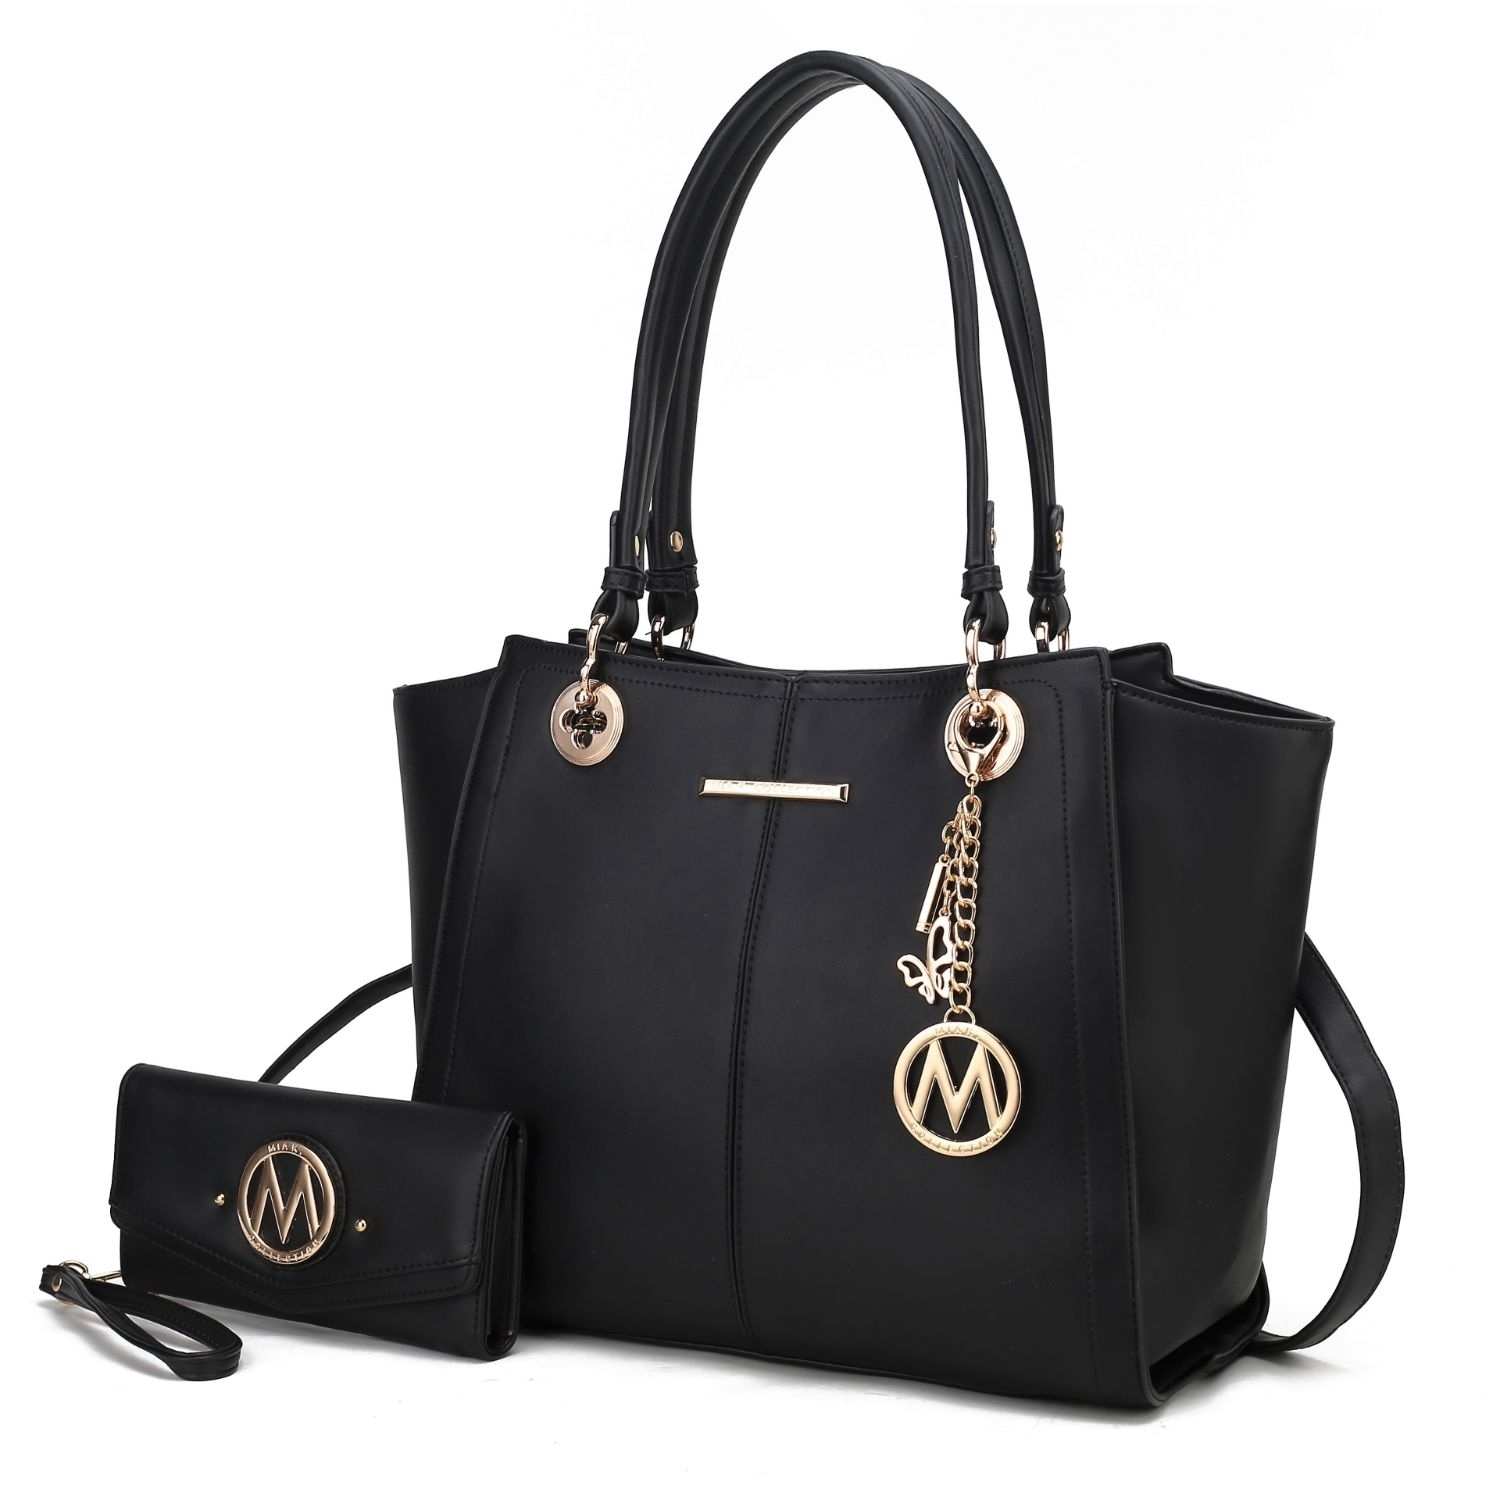 MKF Collection Ivy Vegan Leather Women's Tote Handbag By Mia K With Wallet -2 Pieces - Navy